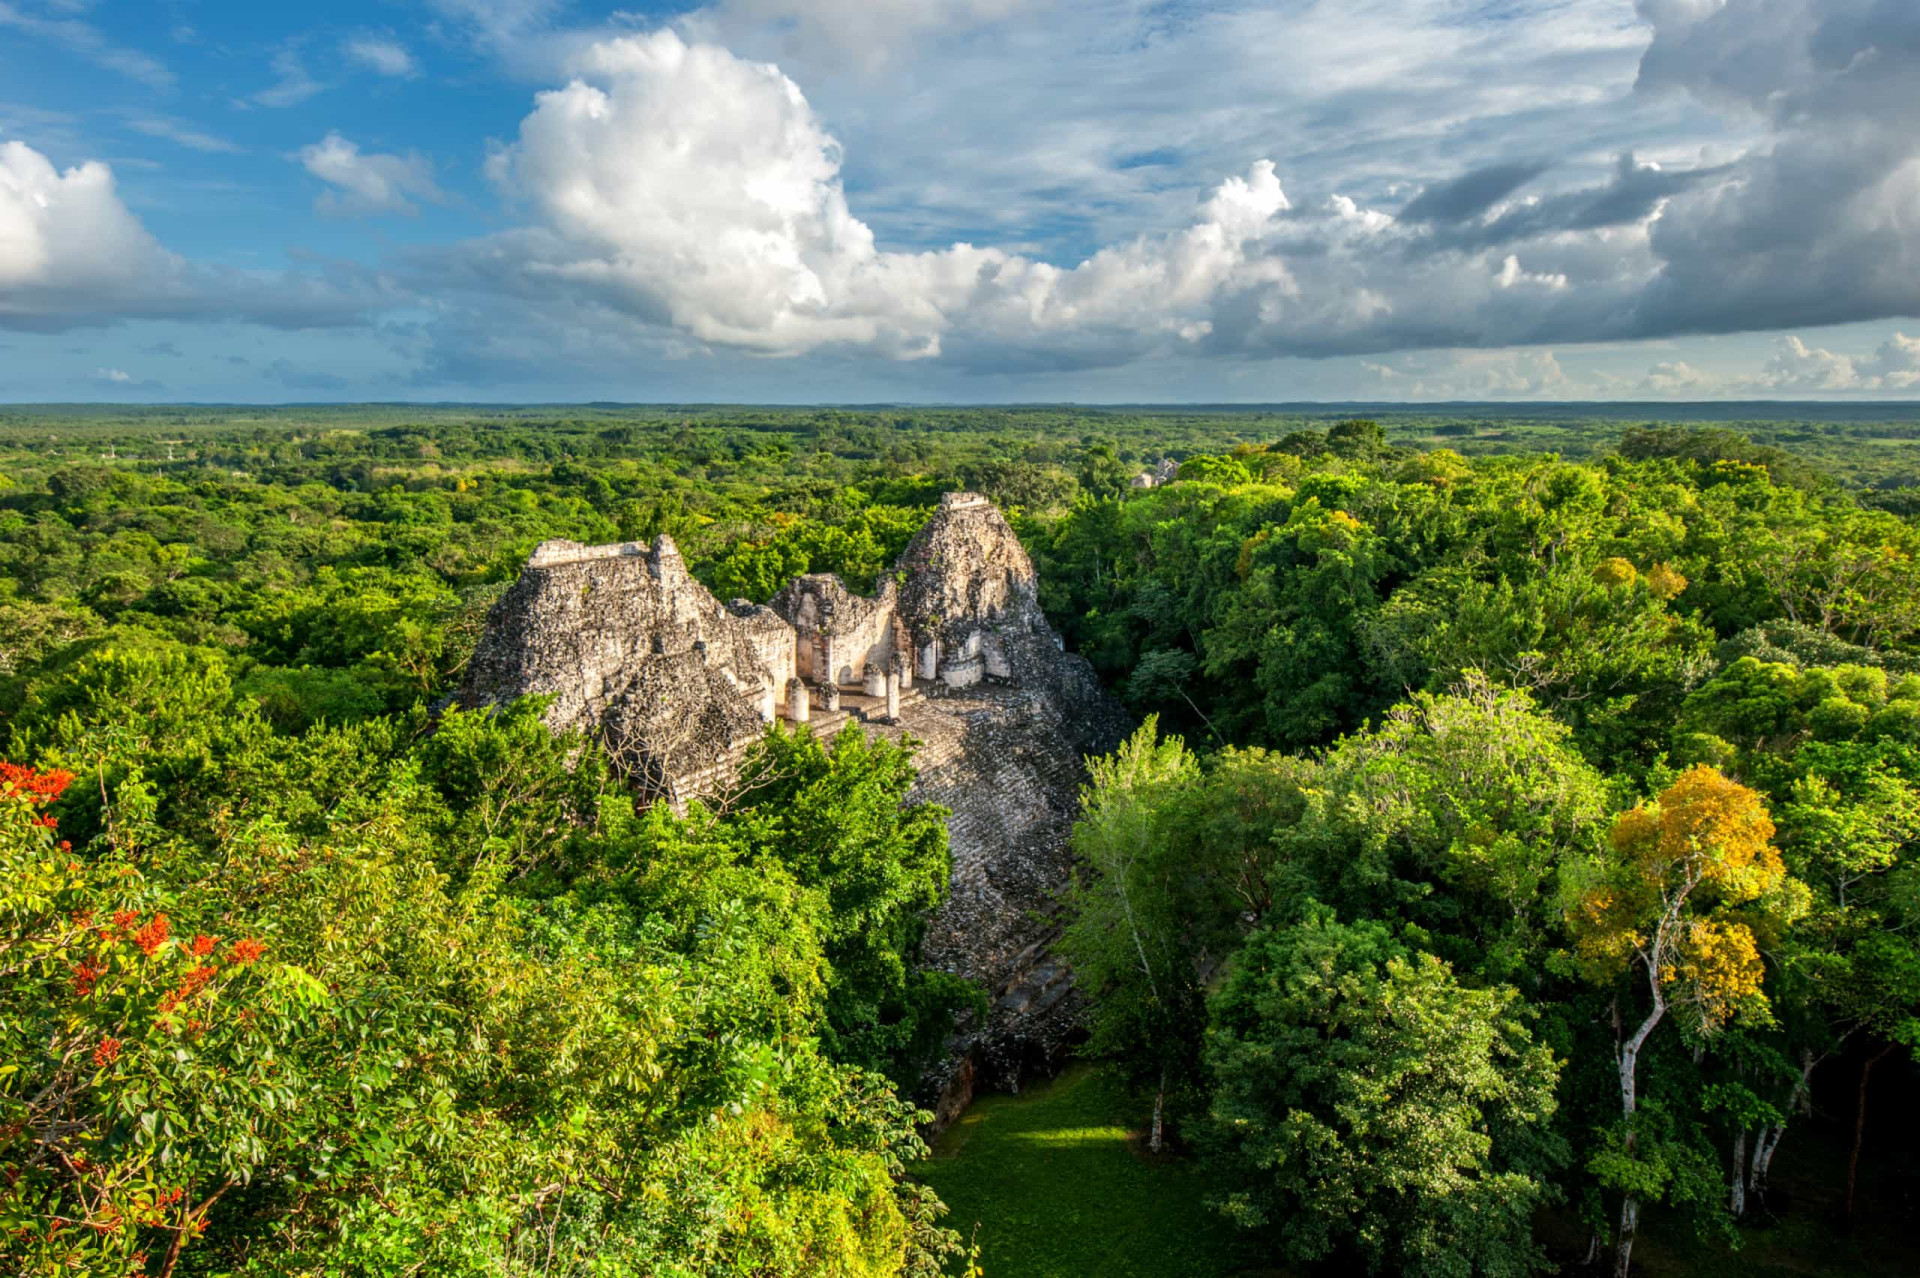 There are more impressive ruins on the Yucatan Peninsula, but if you want to ponder the remnants of the once mighty Maya civilization without being interrupted by hoards of selfie-stick-waving tourists, then head for the remote Becan archaeological site, located in the center of the peninsula.<p>You may also like:<a href="https://www.starsinsider.com/n/440495?utm_source=msn.com&utm_medium=display&utm_campaign=referral_description&utm_content=385359v1en-en"> Hacks to keep food fresh for longer</a></p>